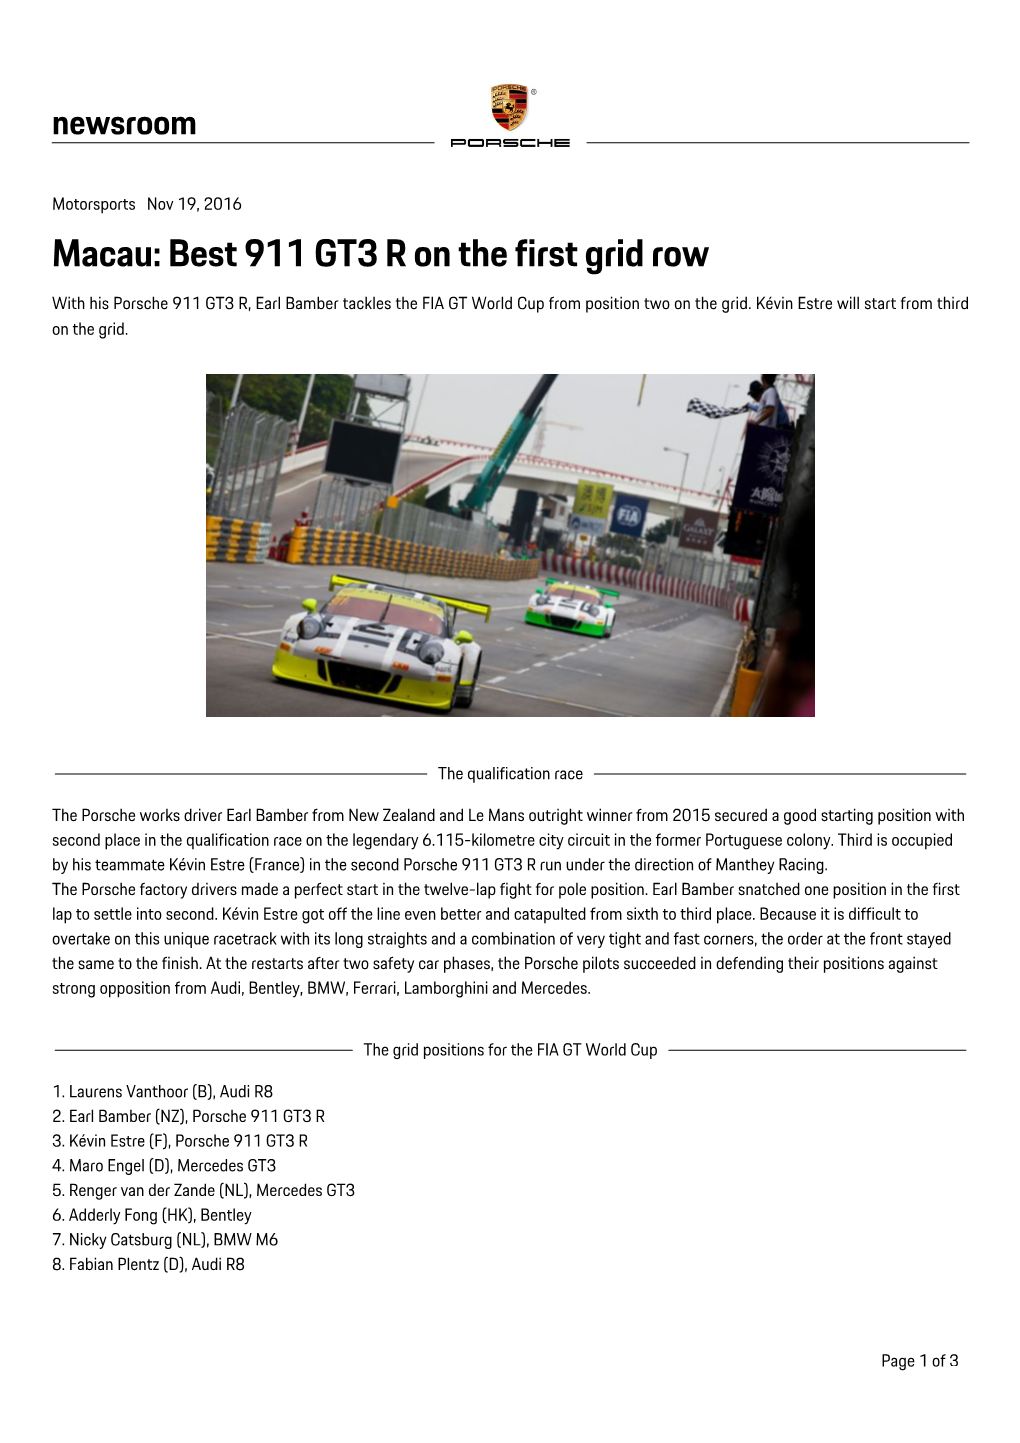 Macau: Best 911 GT3 R on the First Grid Row with His Porsche 911 GT3 R, Earl Bamber Tackles the FIA GT World Cup from Position Two on the Grid